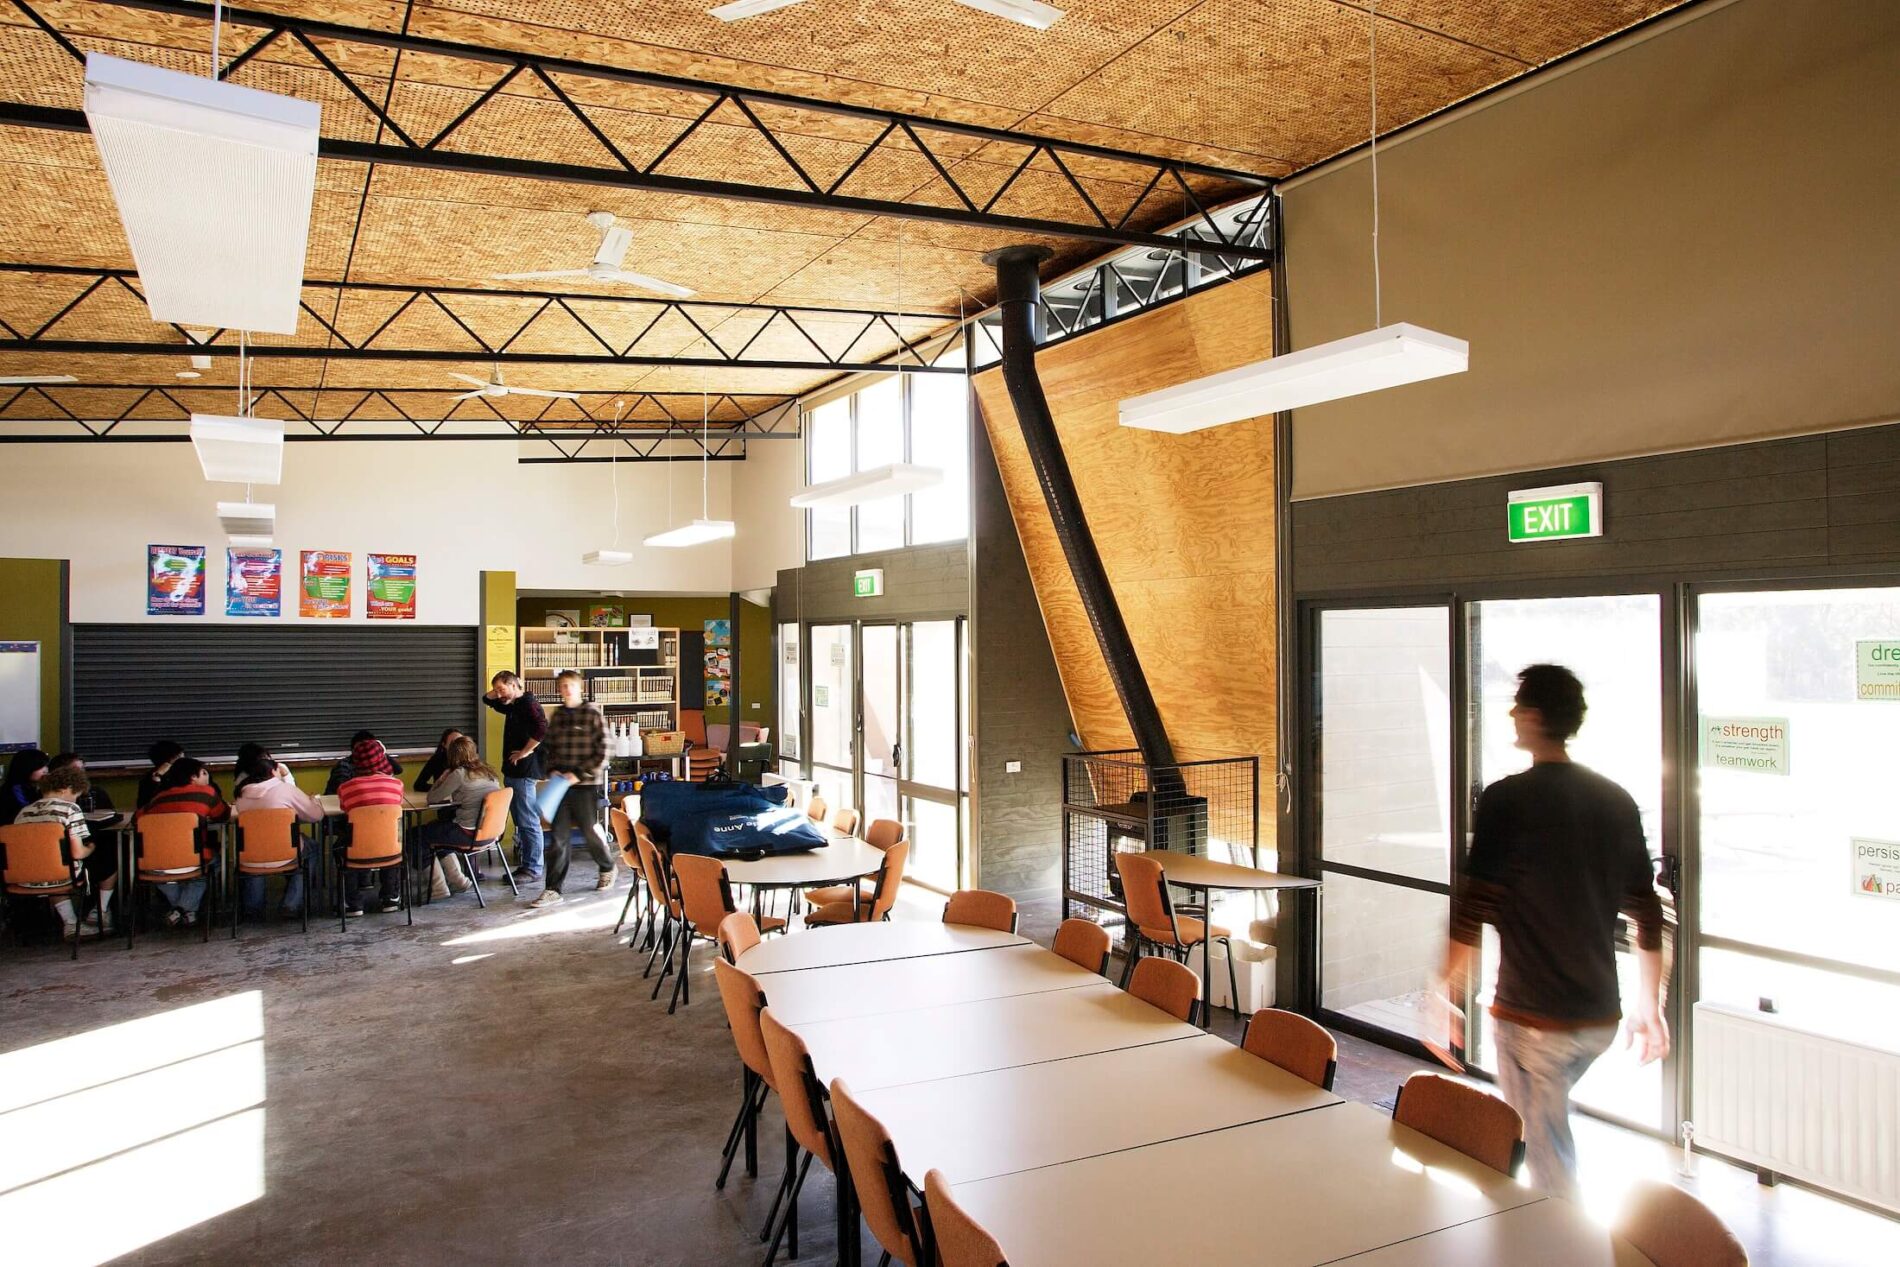 Interior view of large mess hall with exposed horizontal metal trusses and perforated ply ceilings